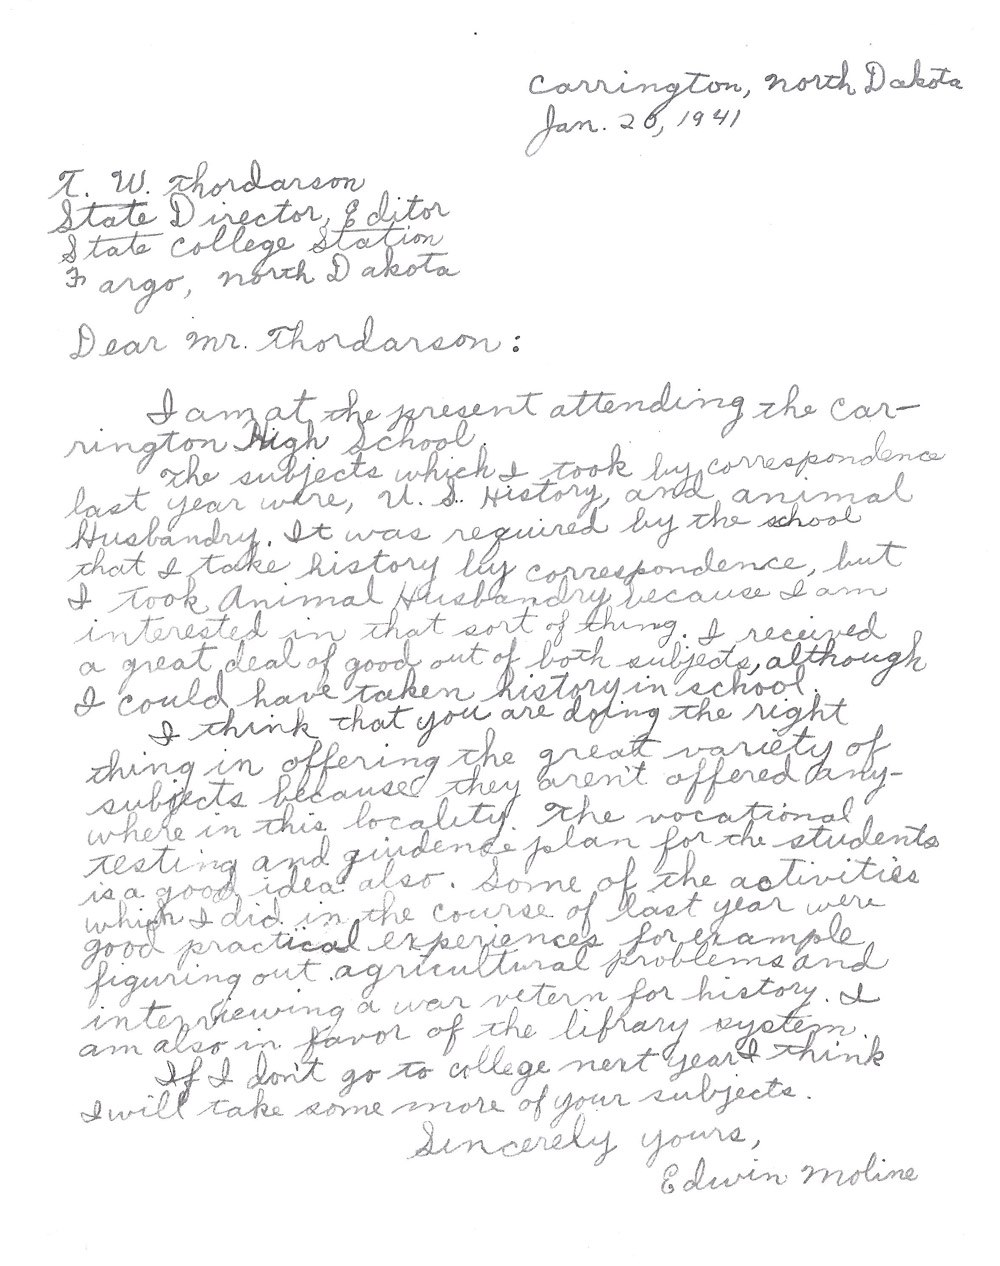 Letters to Correspondence School. These letters were written by four correspondence students and one school administrator. The letters show how important the correspondence school was to students who needed courses their school did not offer or those who had not had opportunity to finish high school. Mr. Fladseth, principal of Horace School, appreciated the variety of courses that his small school could not possibly offer.